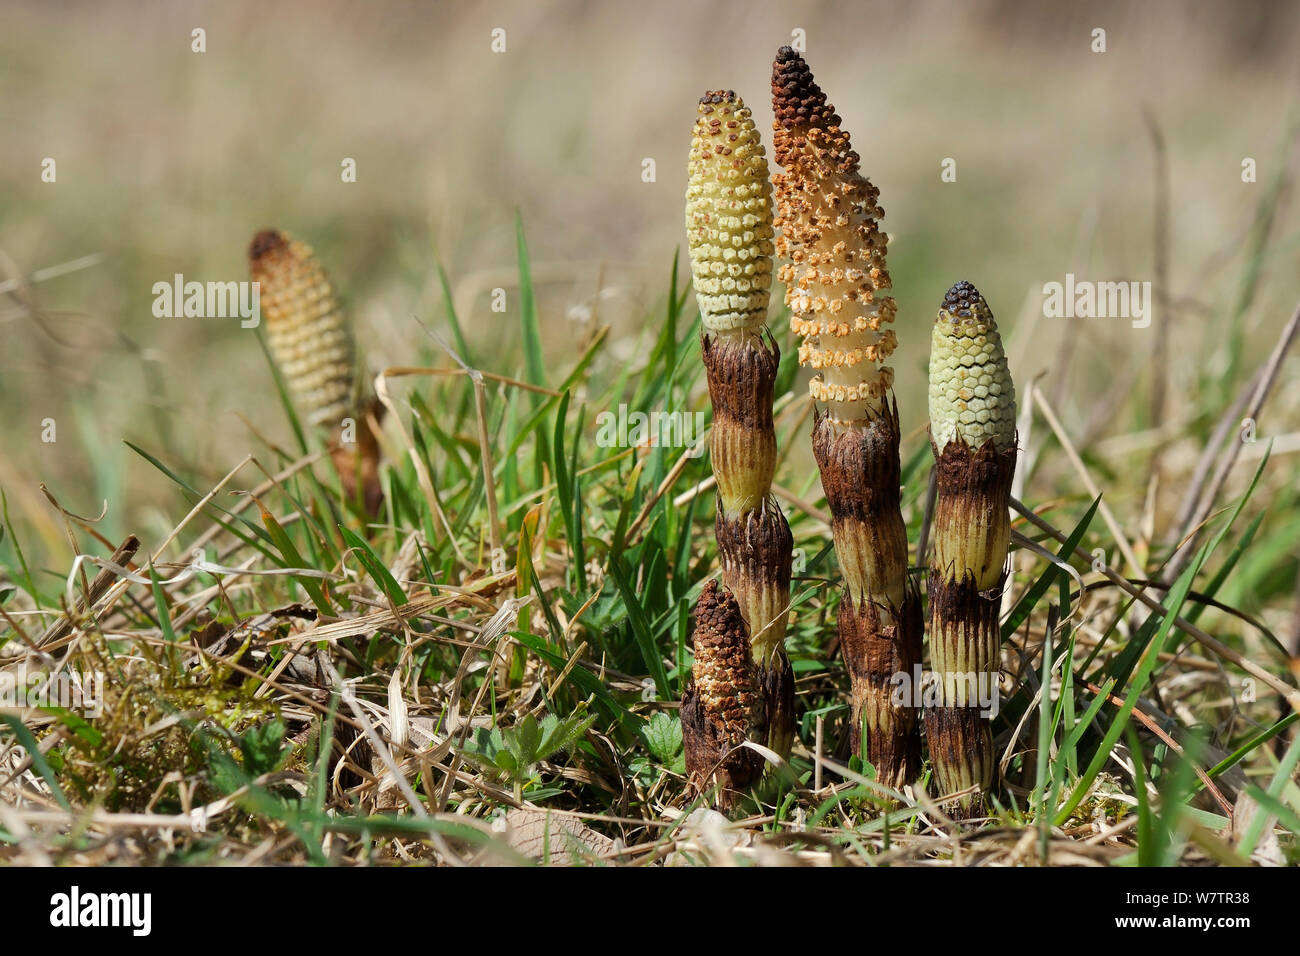 Spore cones of Great horsetail (Equisteum telmateia) amerging from marshy ground around a pond, Wiltshire, UK, April. Stock Photo